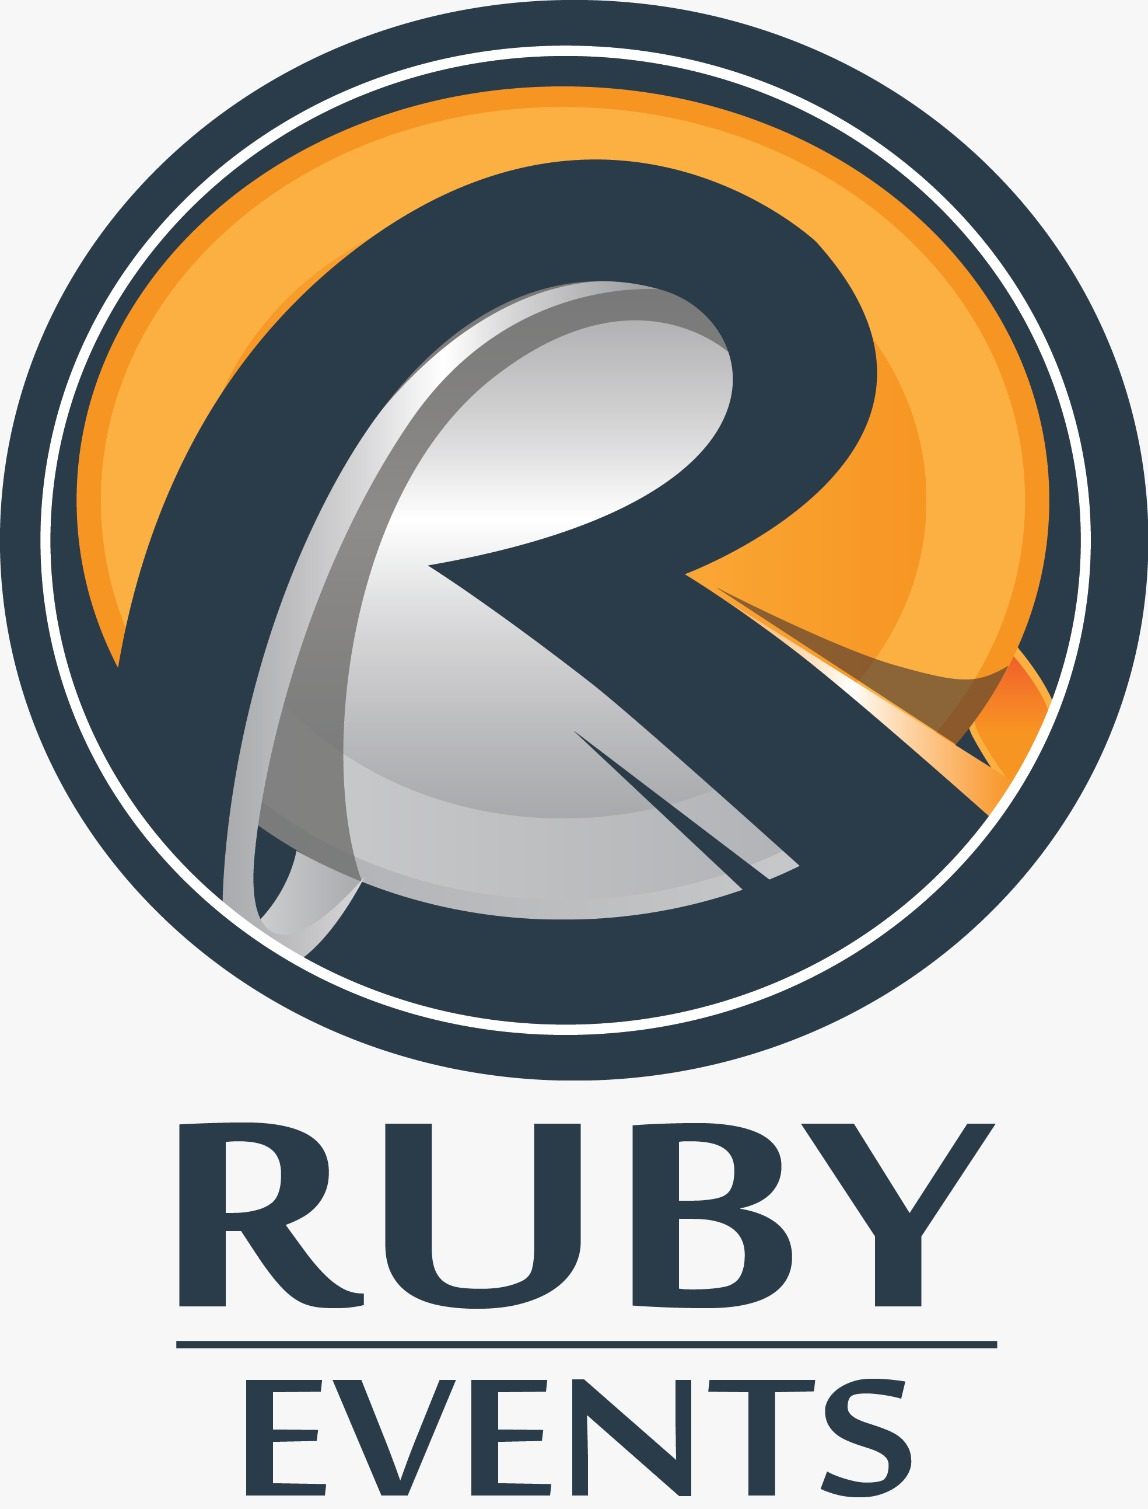 RUBY EVENTS